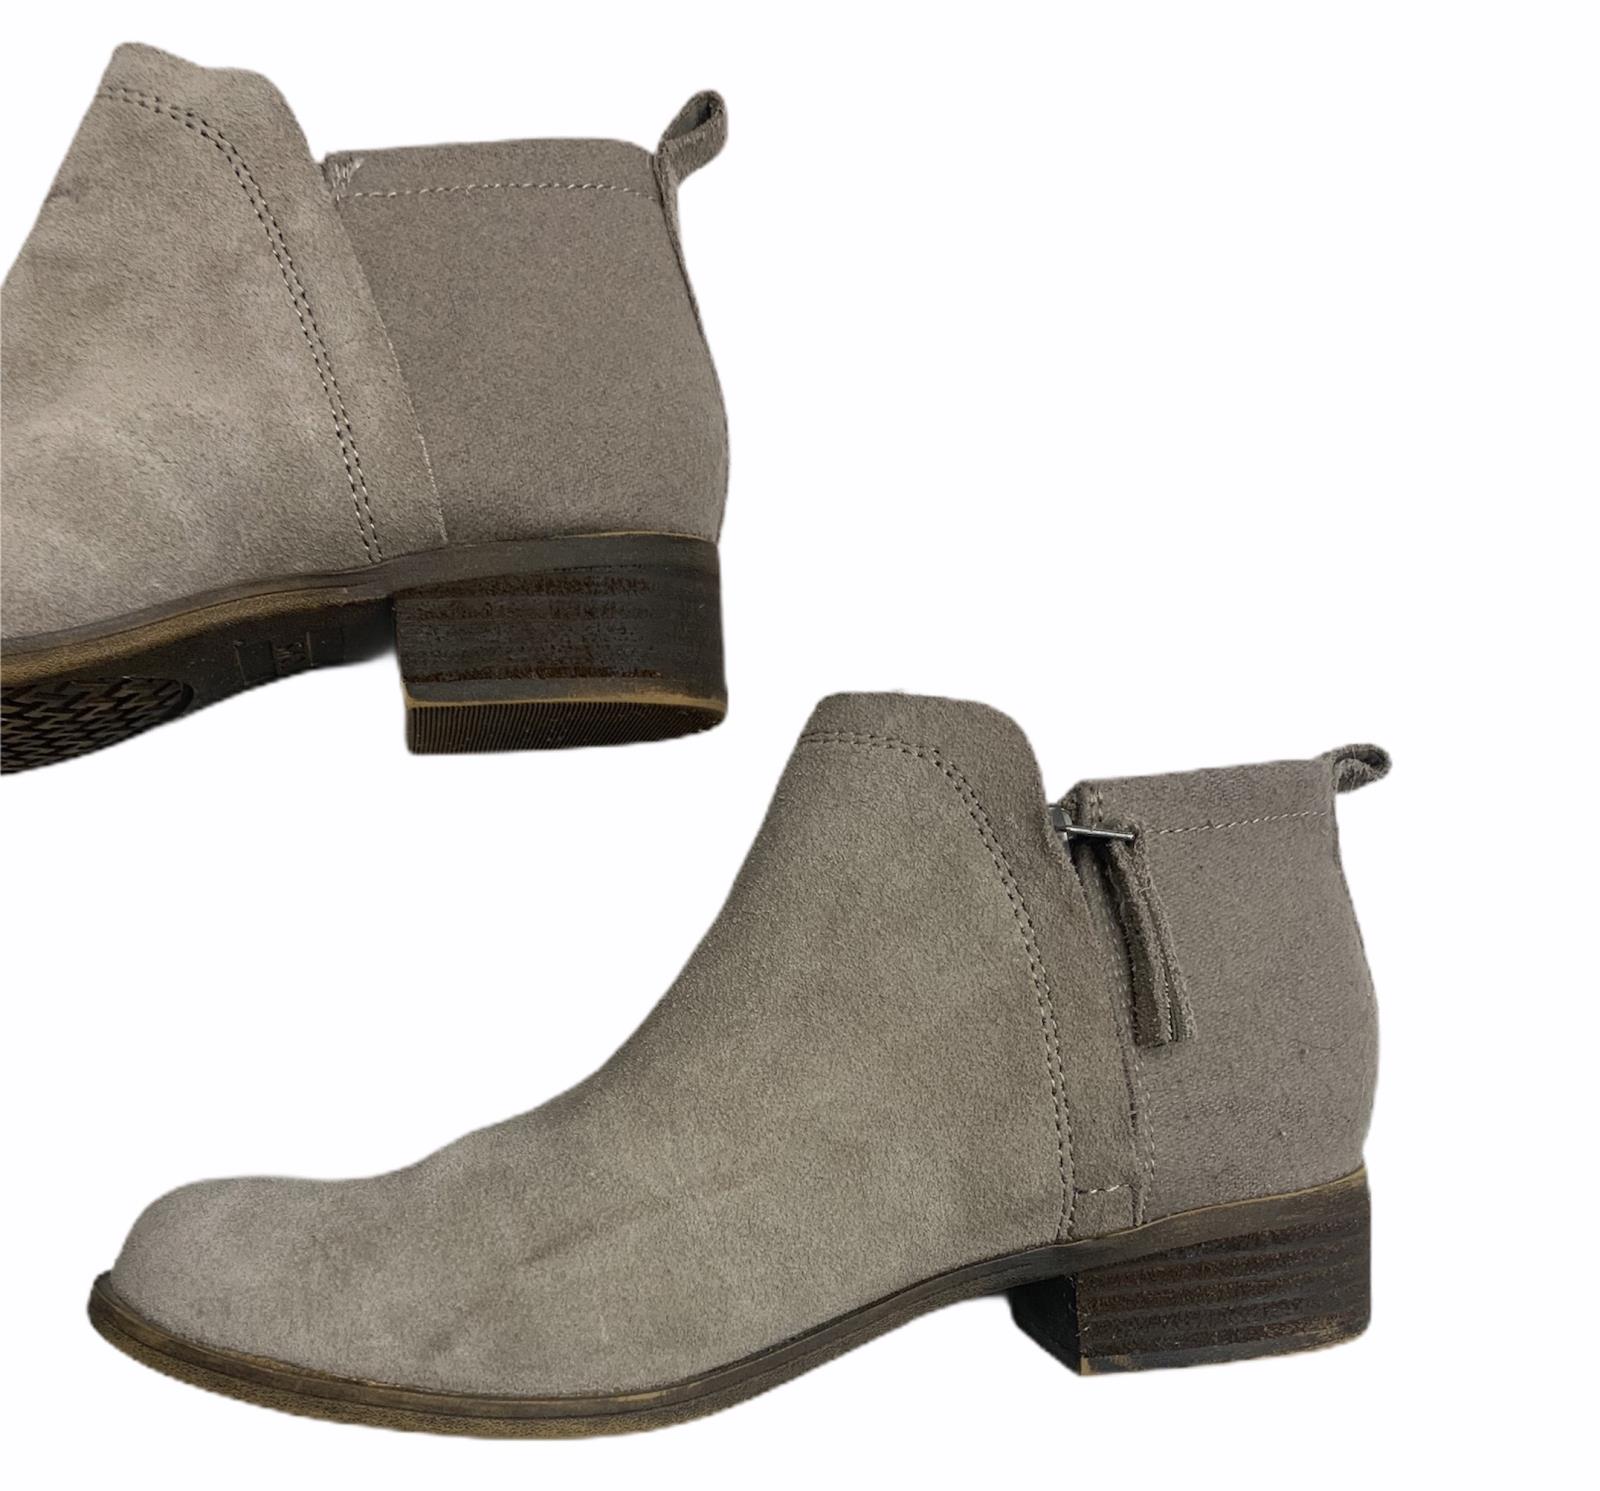 TOMS Deia Booties Suede Ankle Boots Side Zip Size 6.5 Sand | eBay